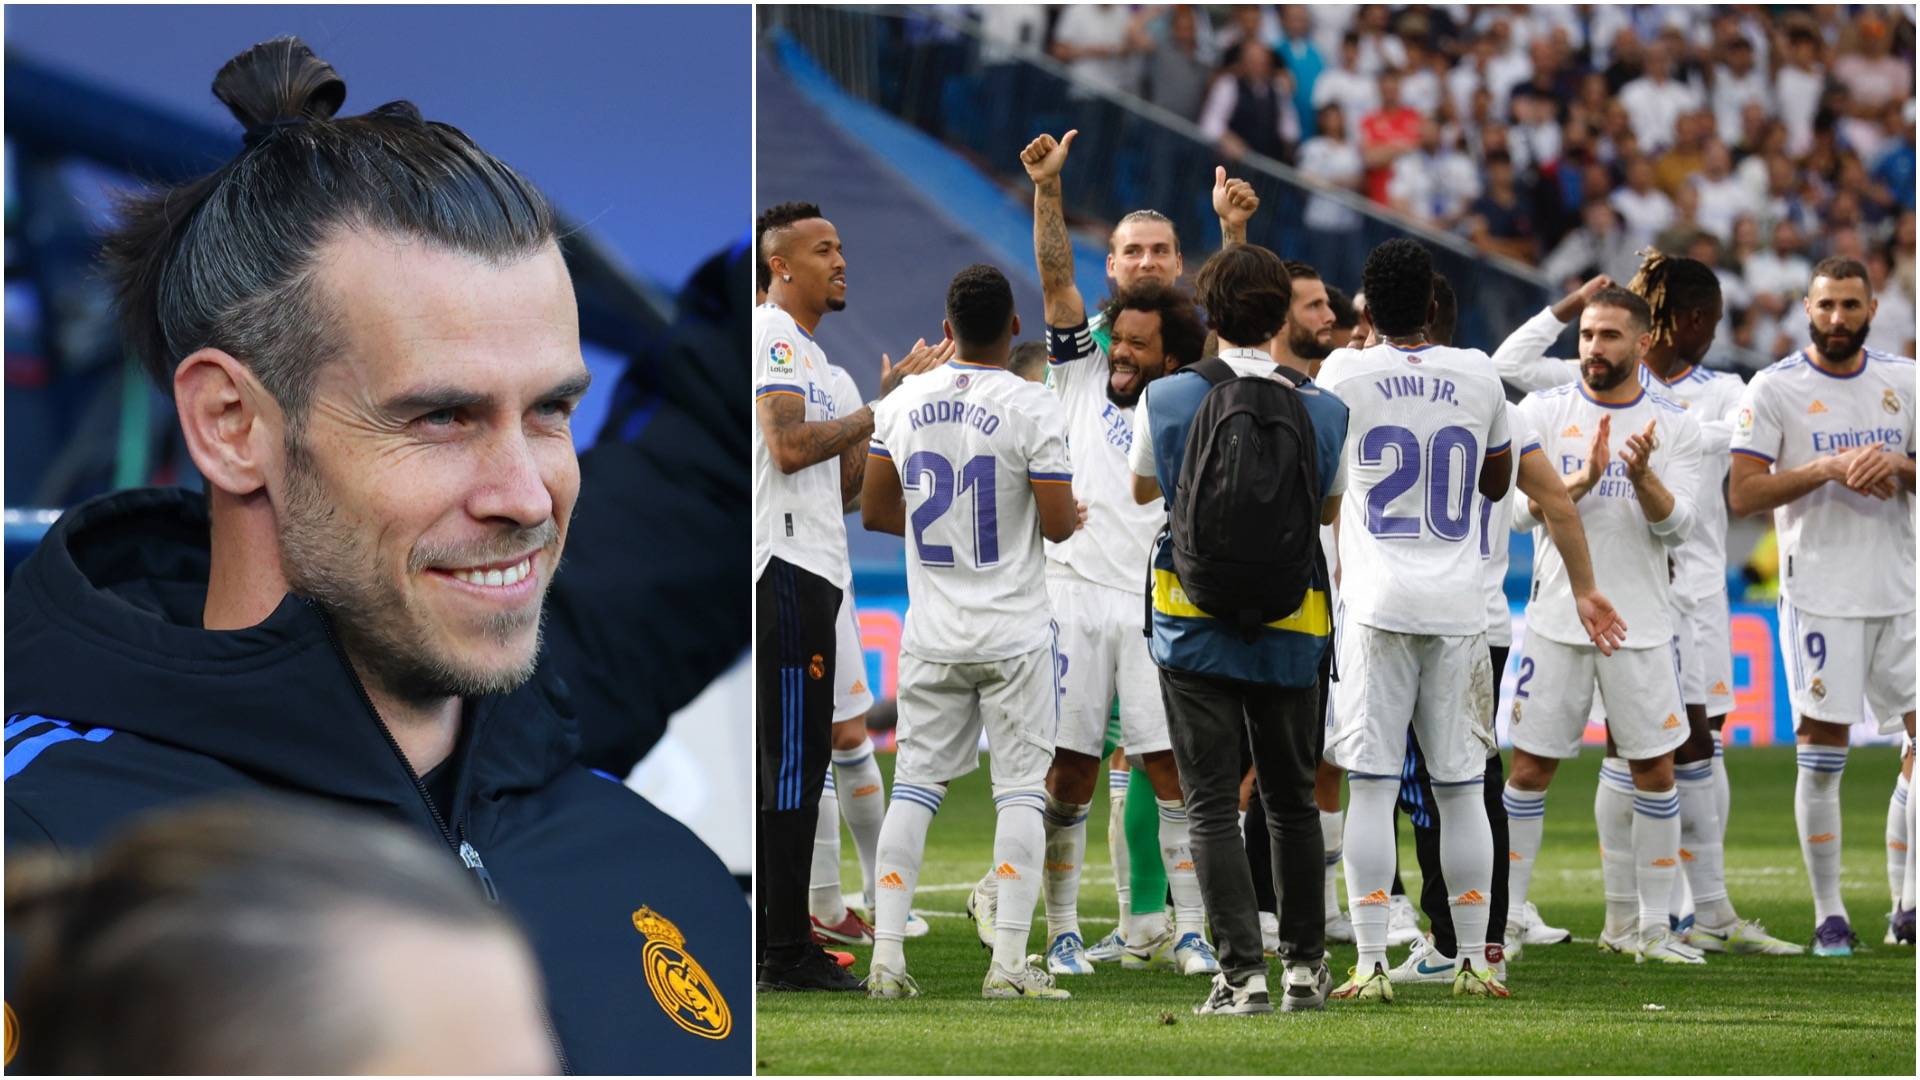 Real Madrid’s Gareth Bale looked awkward in dressing room after 3-2 win vs Sevilla